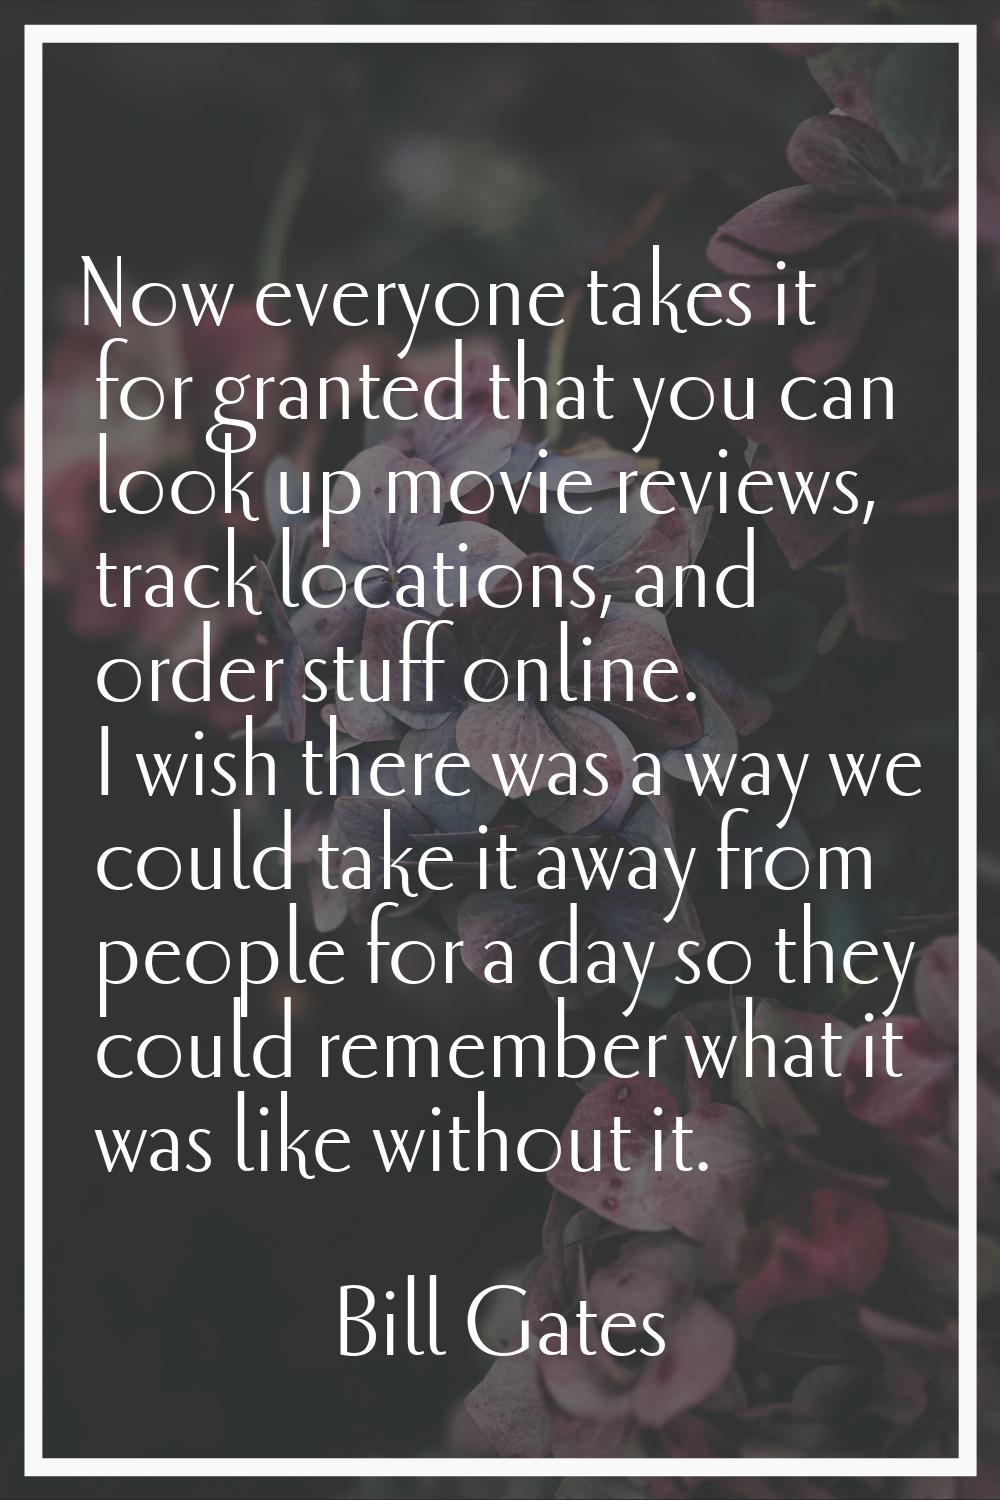 Now everyone takes it for granted that you can look up movie reviews, track locations, and order st